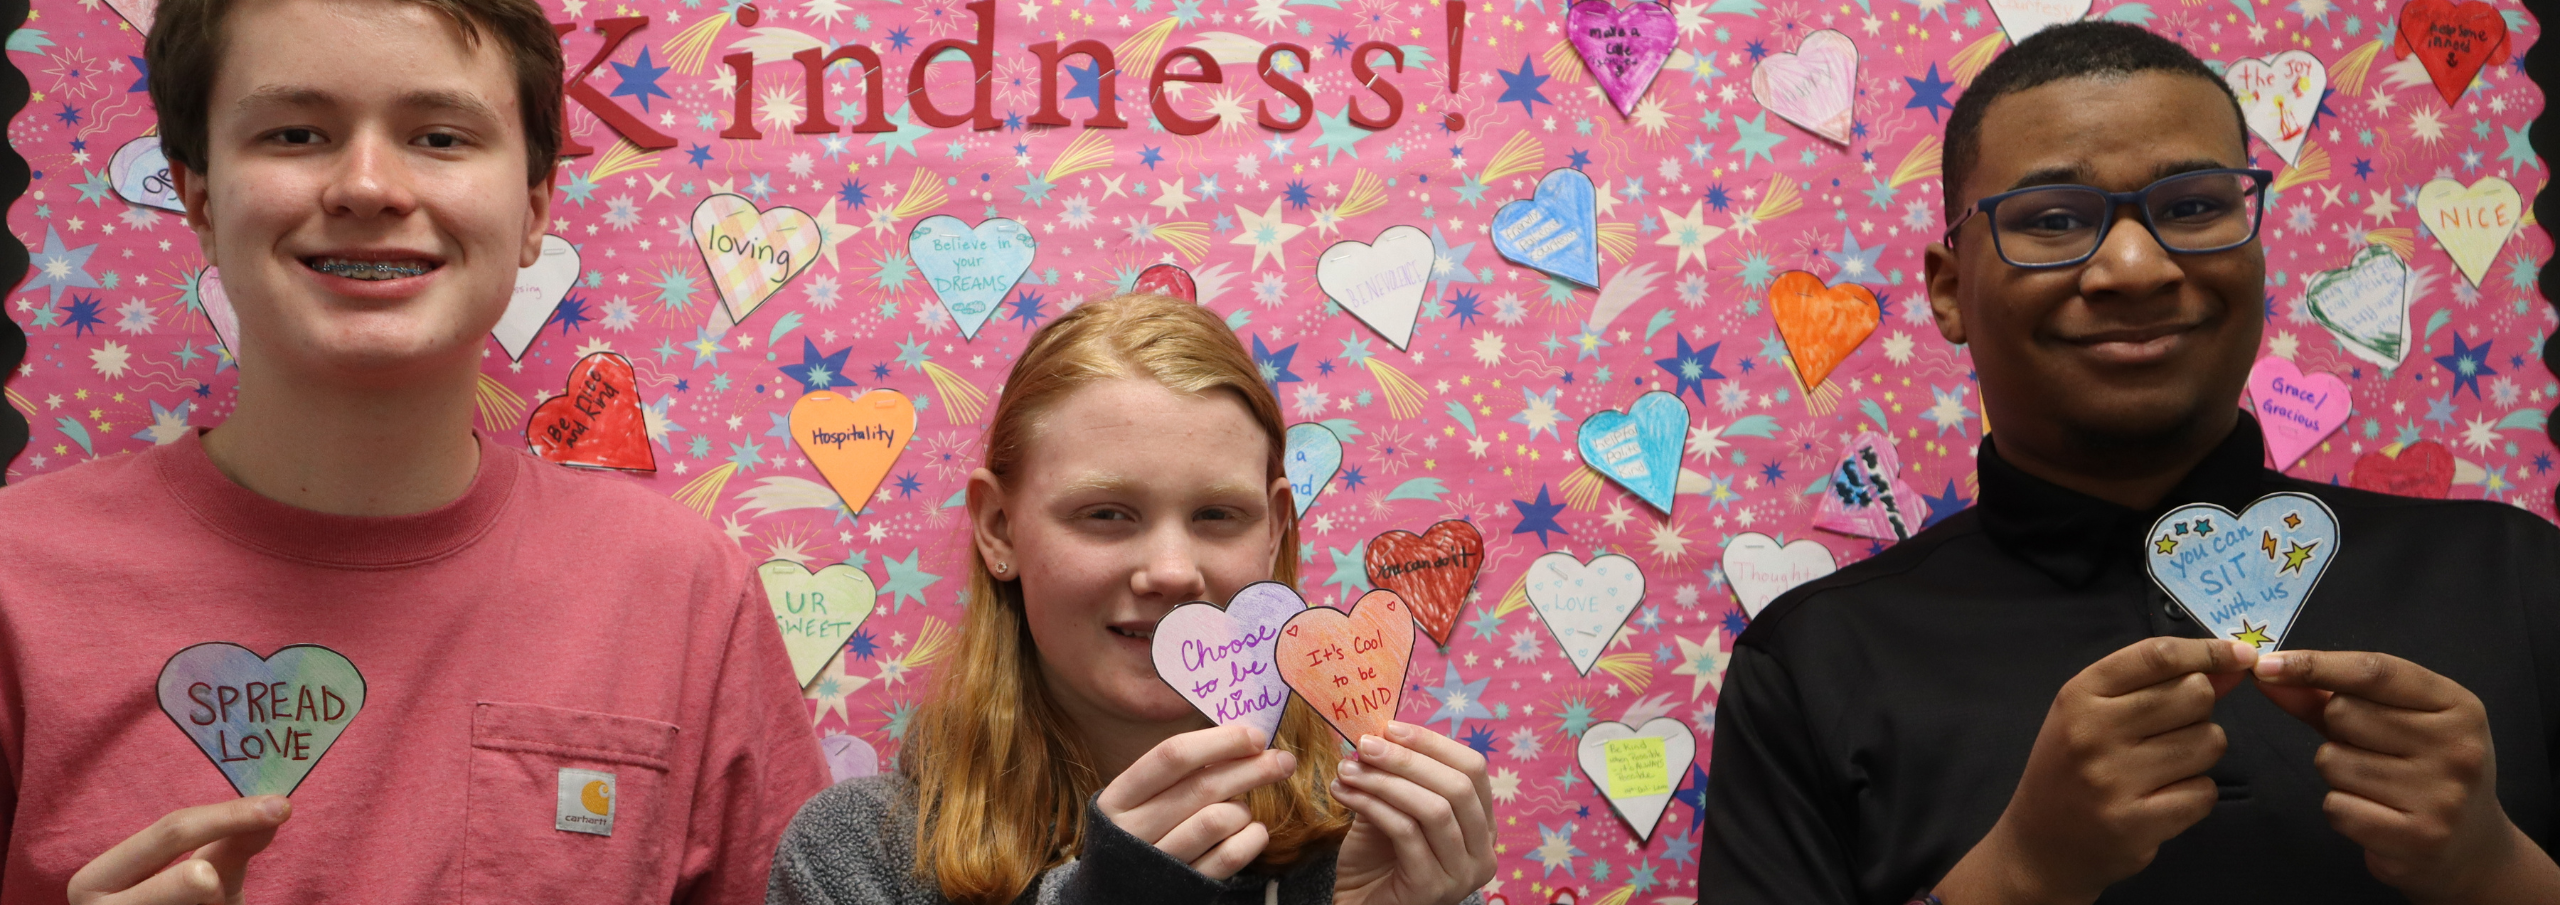 Northstar students holding kindness hearts